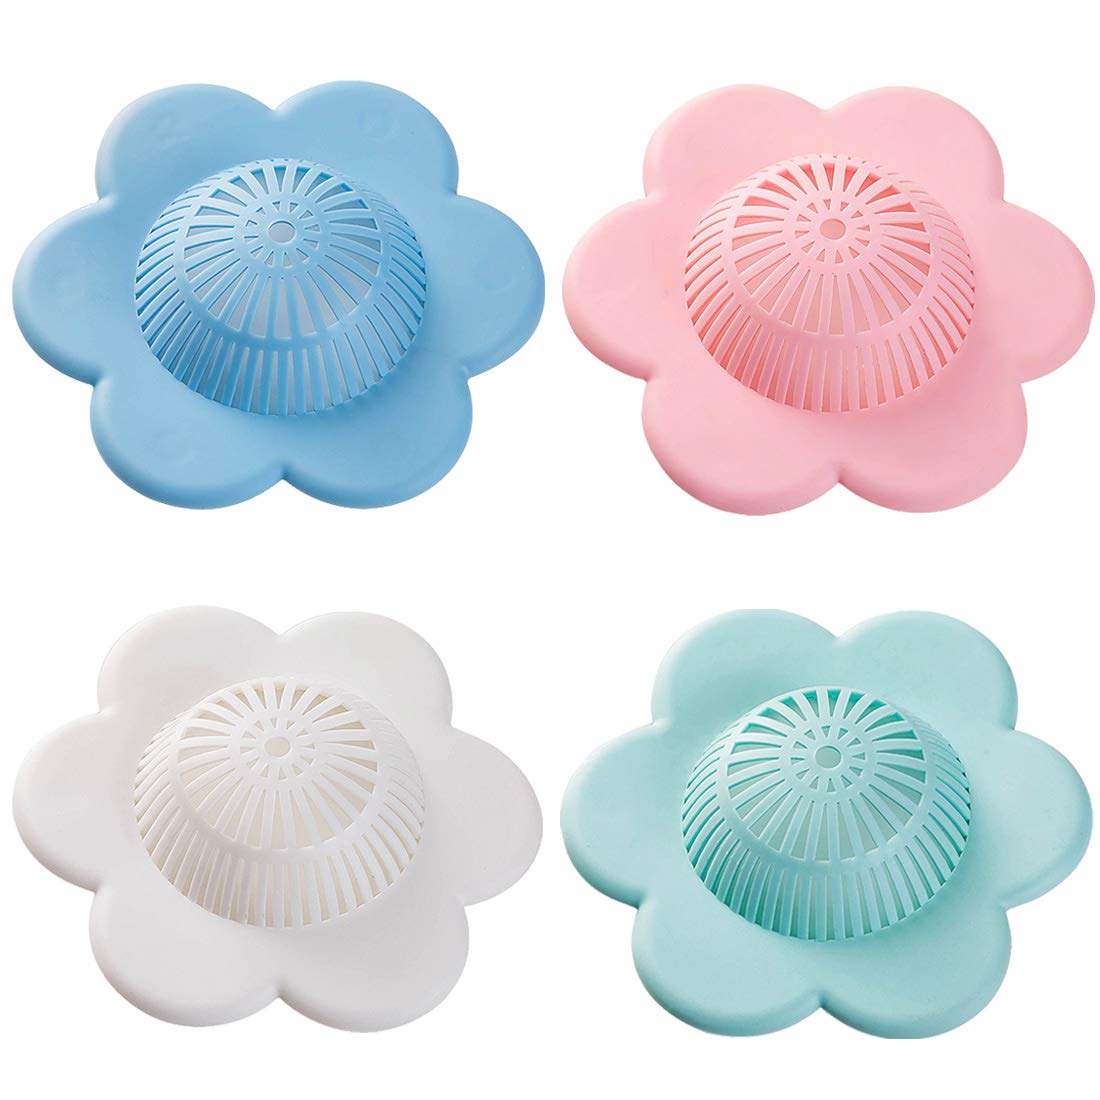 5 pcs Hair Catcher Shower Drain Durable Silicone Hair Stopper Shower Drain  Cover Hair Trap Easy to Install and Clean Suit for Bathroom Bathtub Tub and  Kitchen